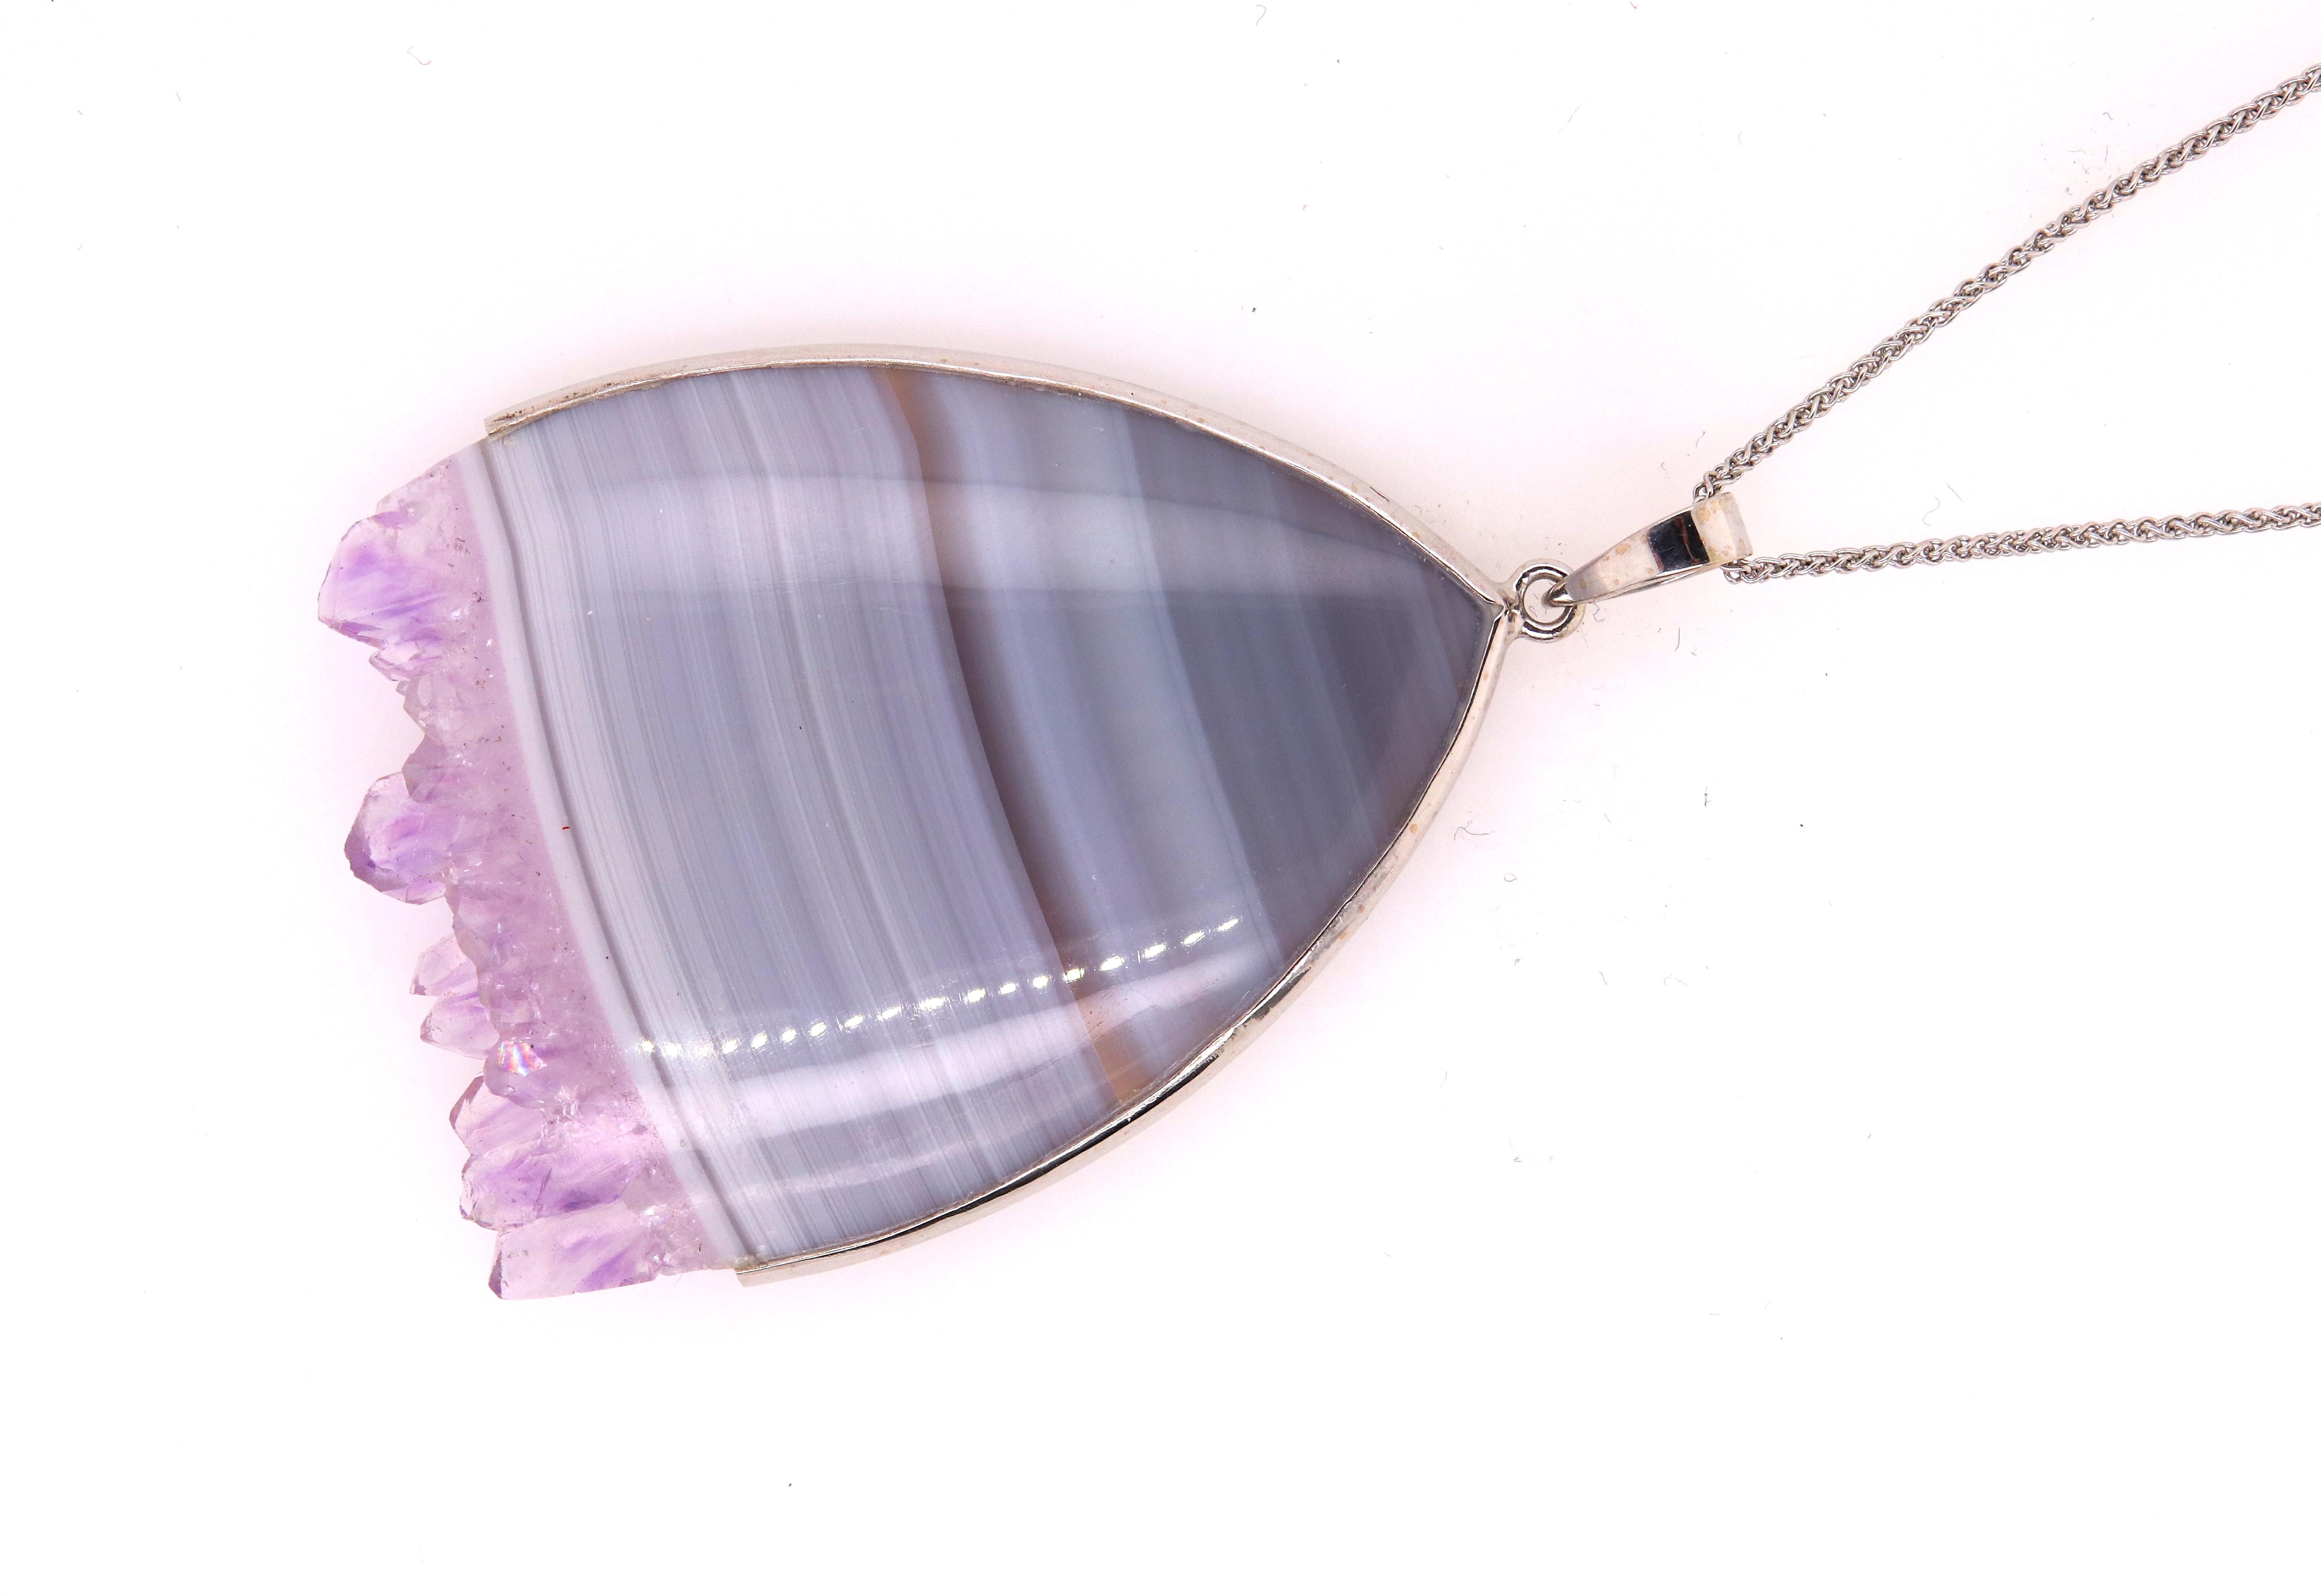 Material: 14K White Gold
Center Stone Details: 1 Pear Shaped Amethyst Crystal 

Fine one-of-a-kind craftsmanship meets incredible quality in this breathtaking piece of jewelry.

All Alberto pieces are made in the U.S.A. and come with a Lifetime